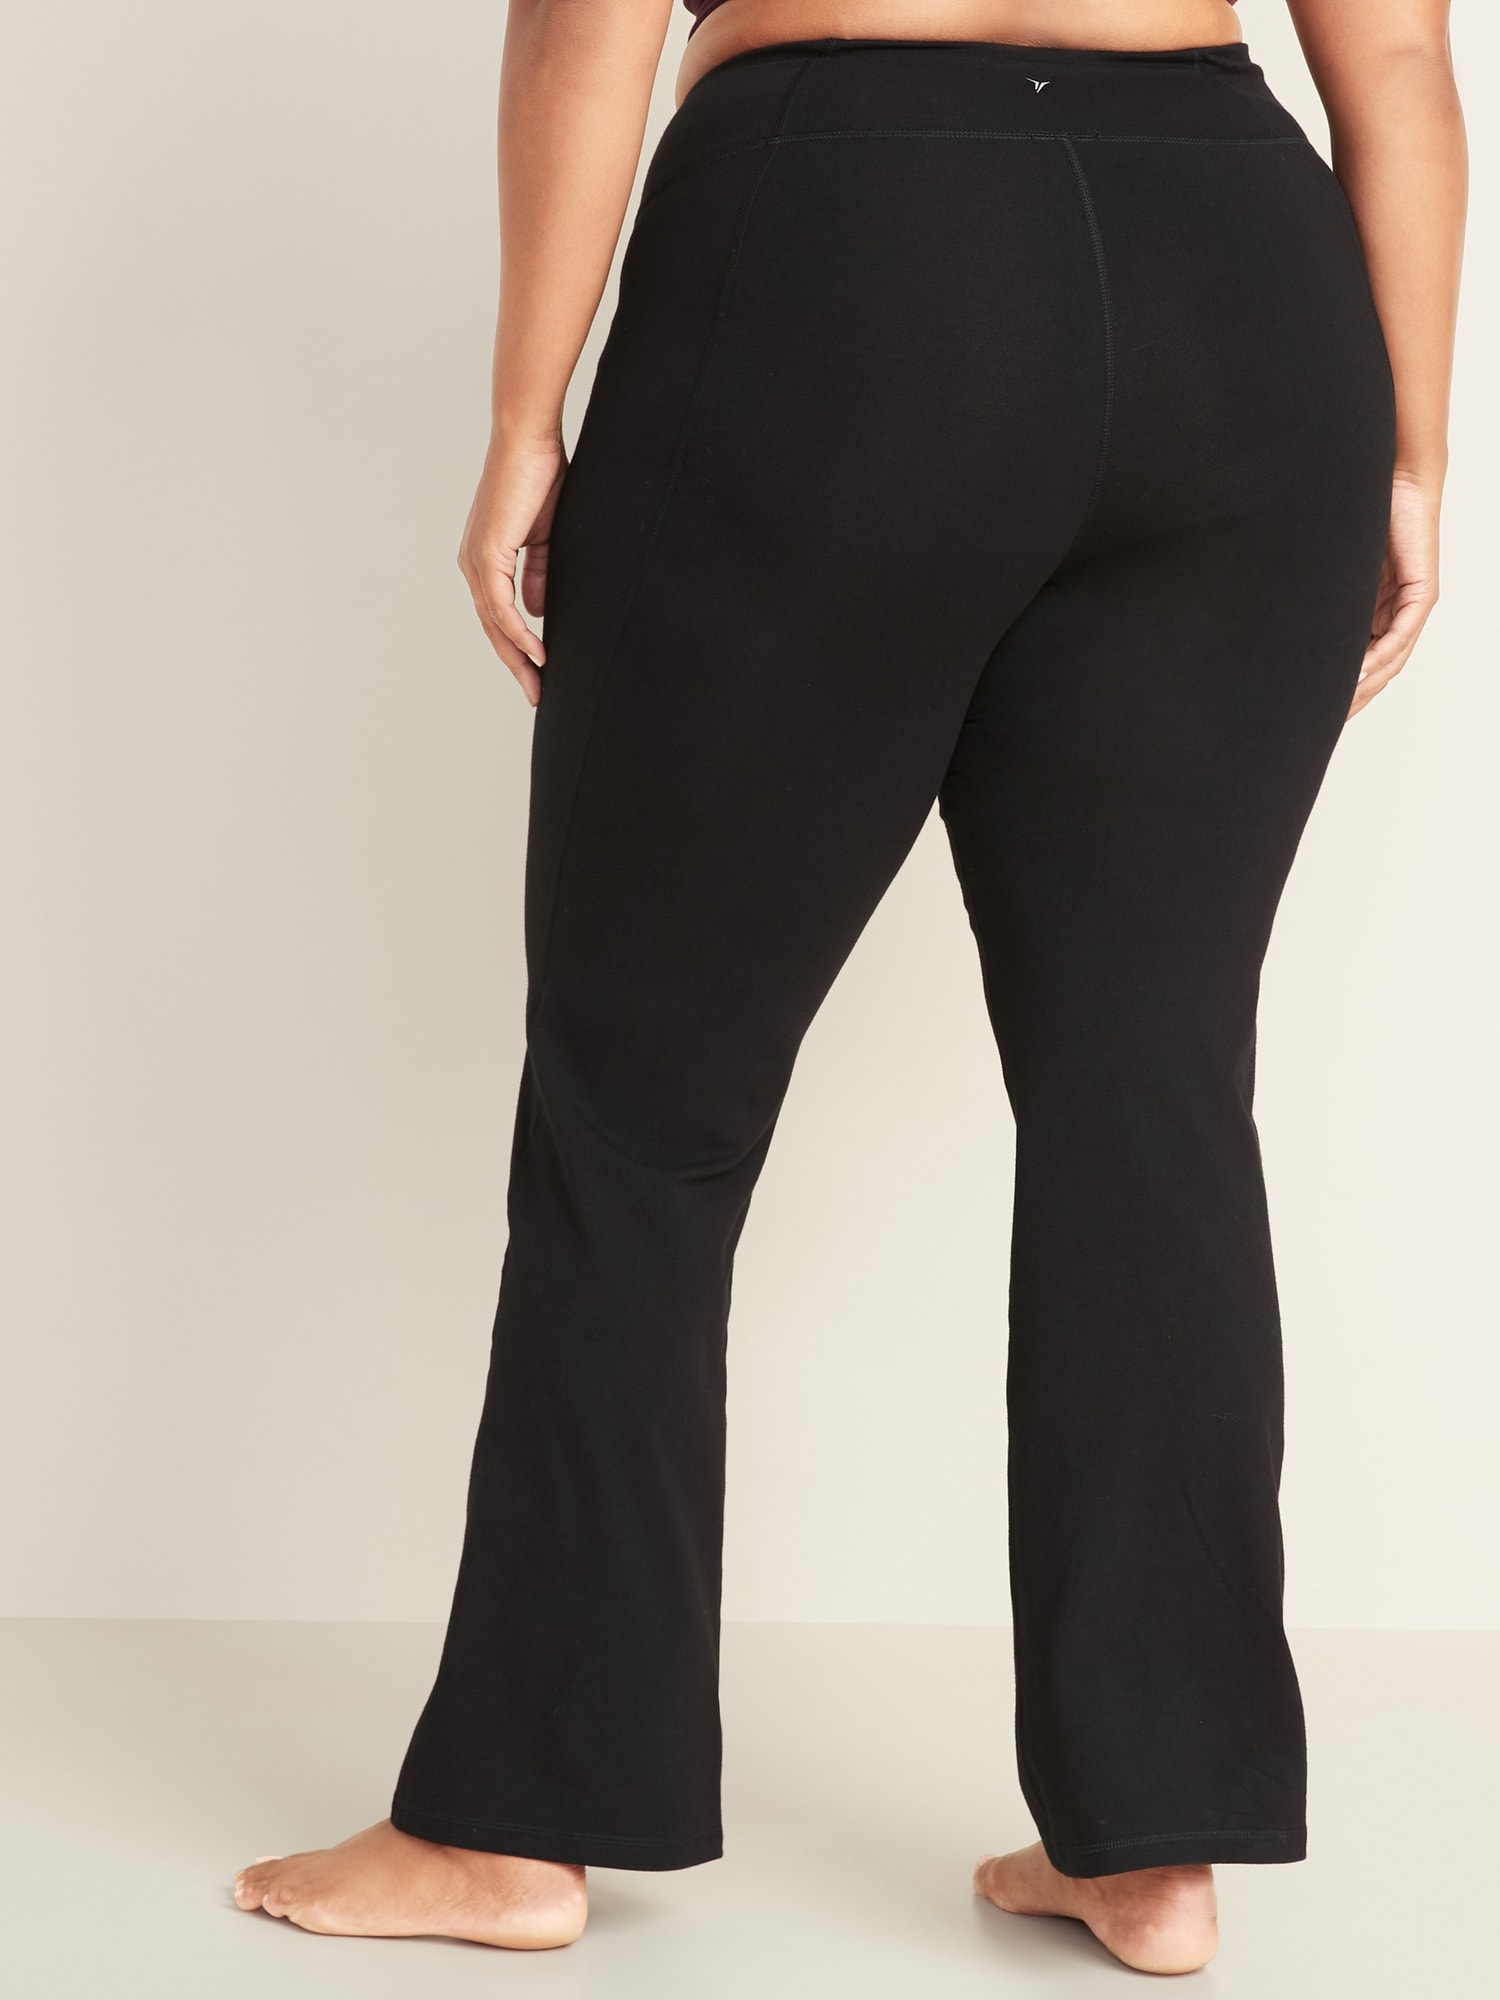 High-Waisted Plus-Size Boot-Cut Yoga 